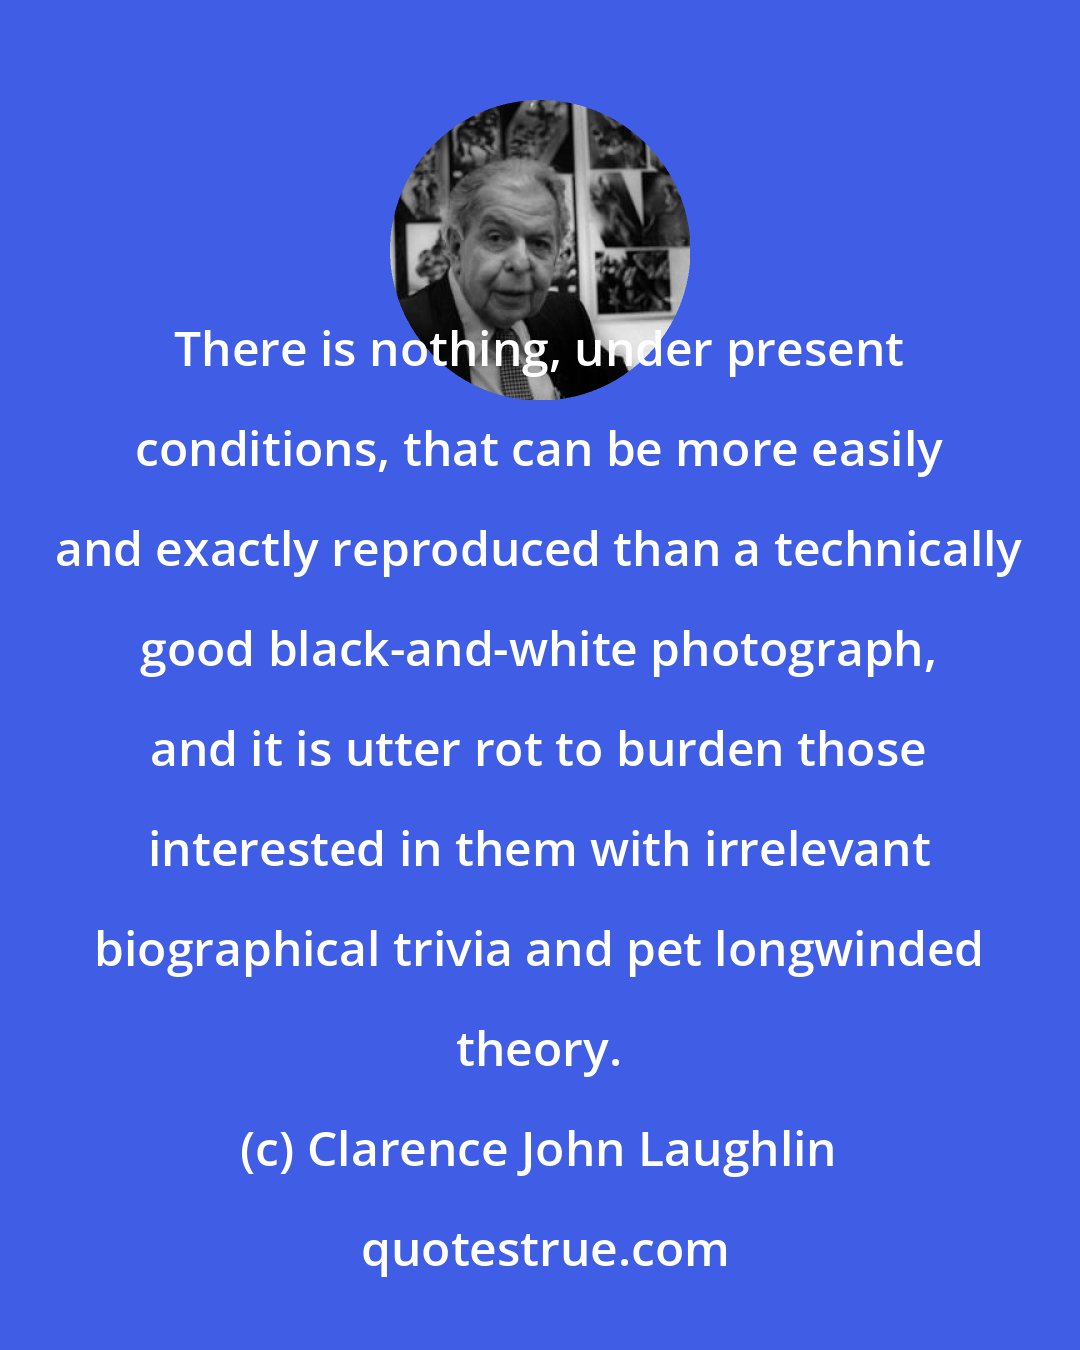 Clarence John Laughlin: There is nothing, under present conditions, that can be more easily and exactly reproduced than a technically good black-and-white photograph, and it is utter rot to burden those interested in them with irrelevant biographical trivia and pet longwinded theory.